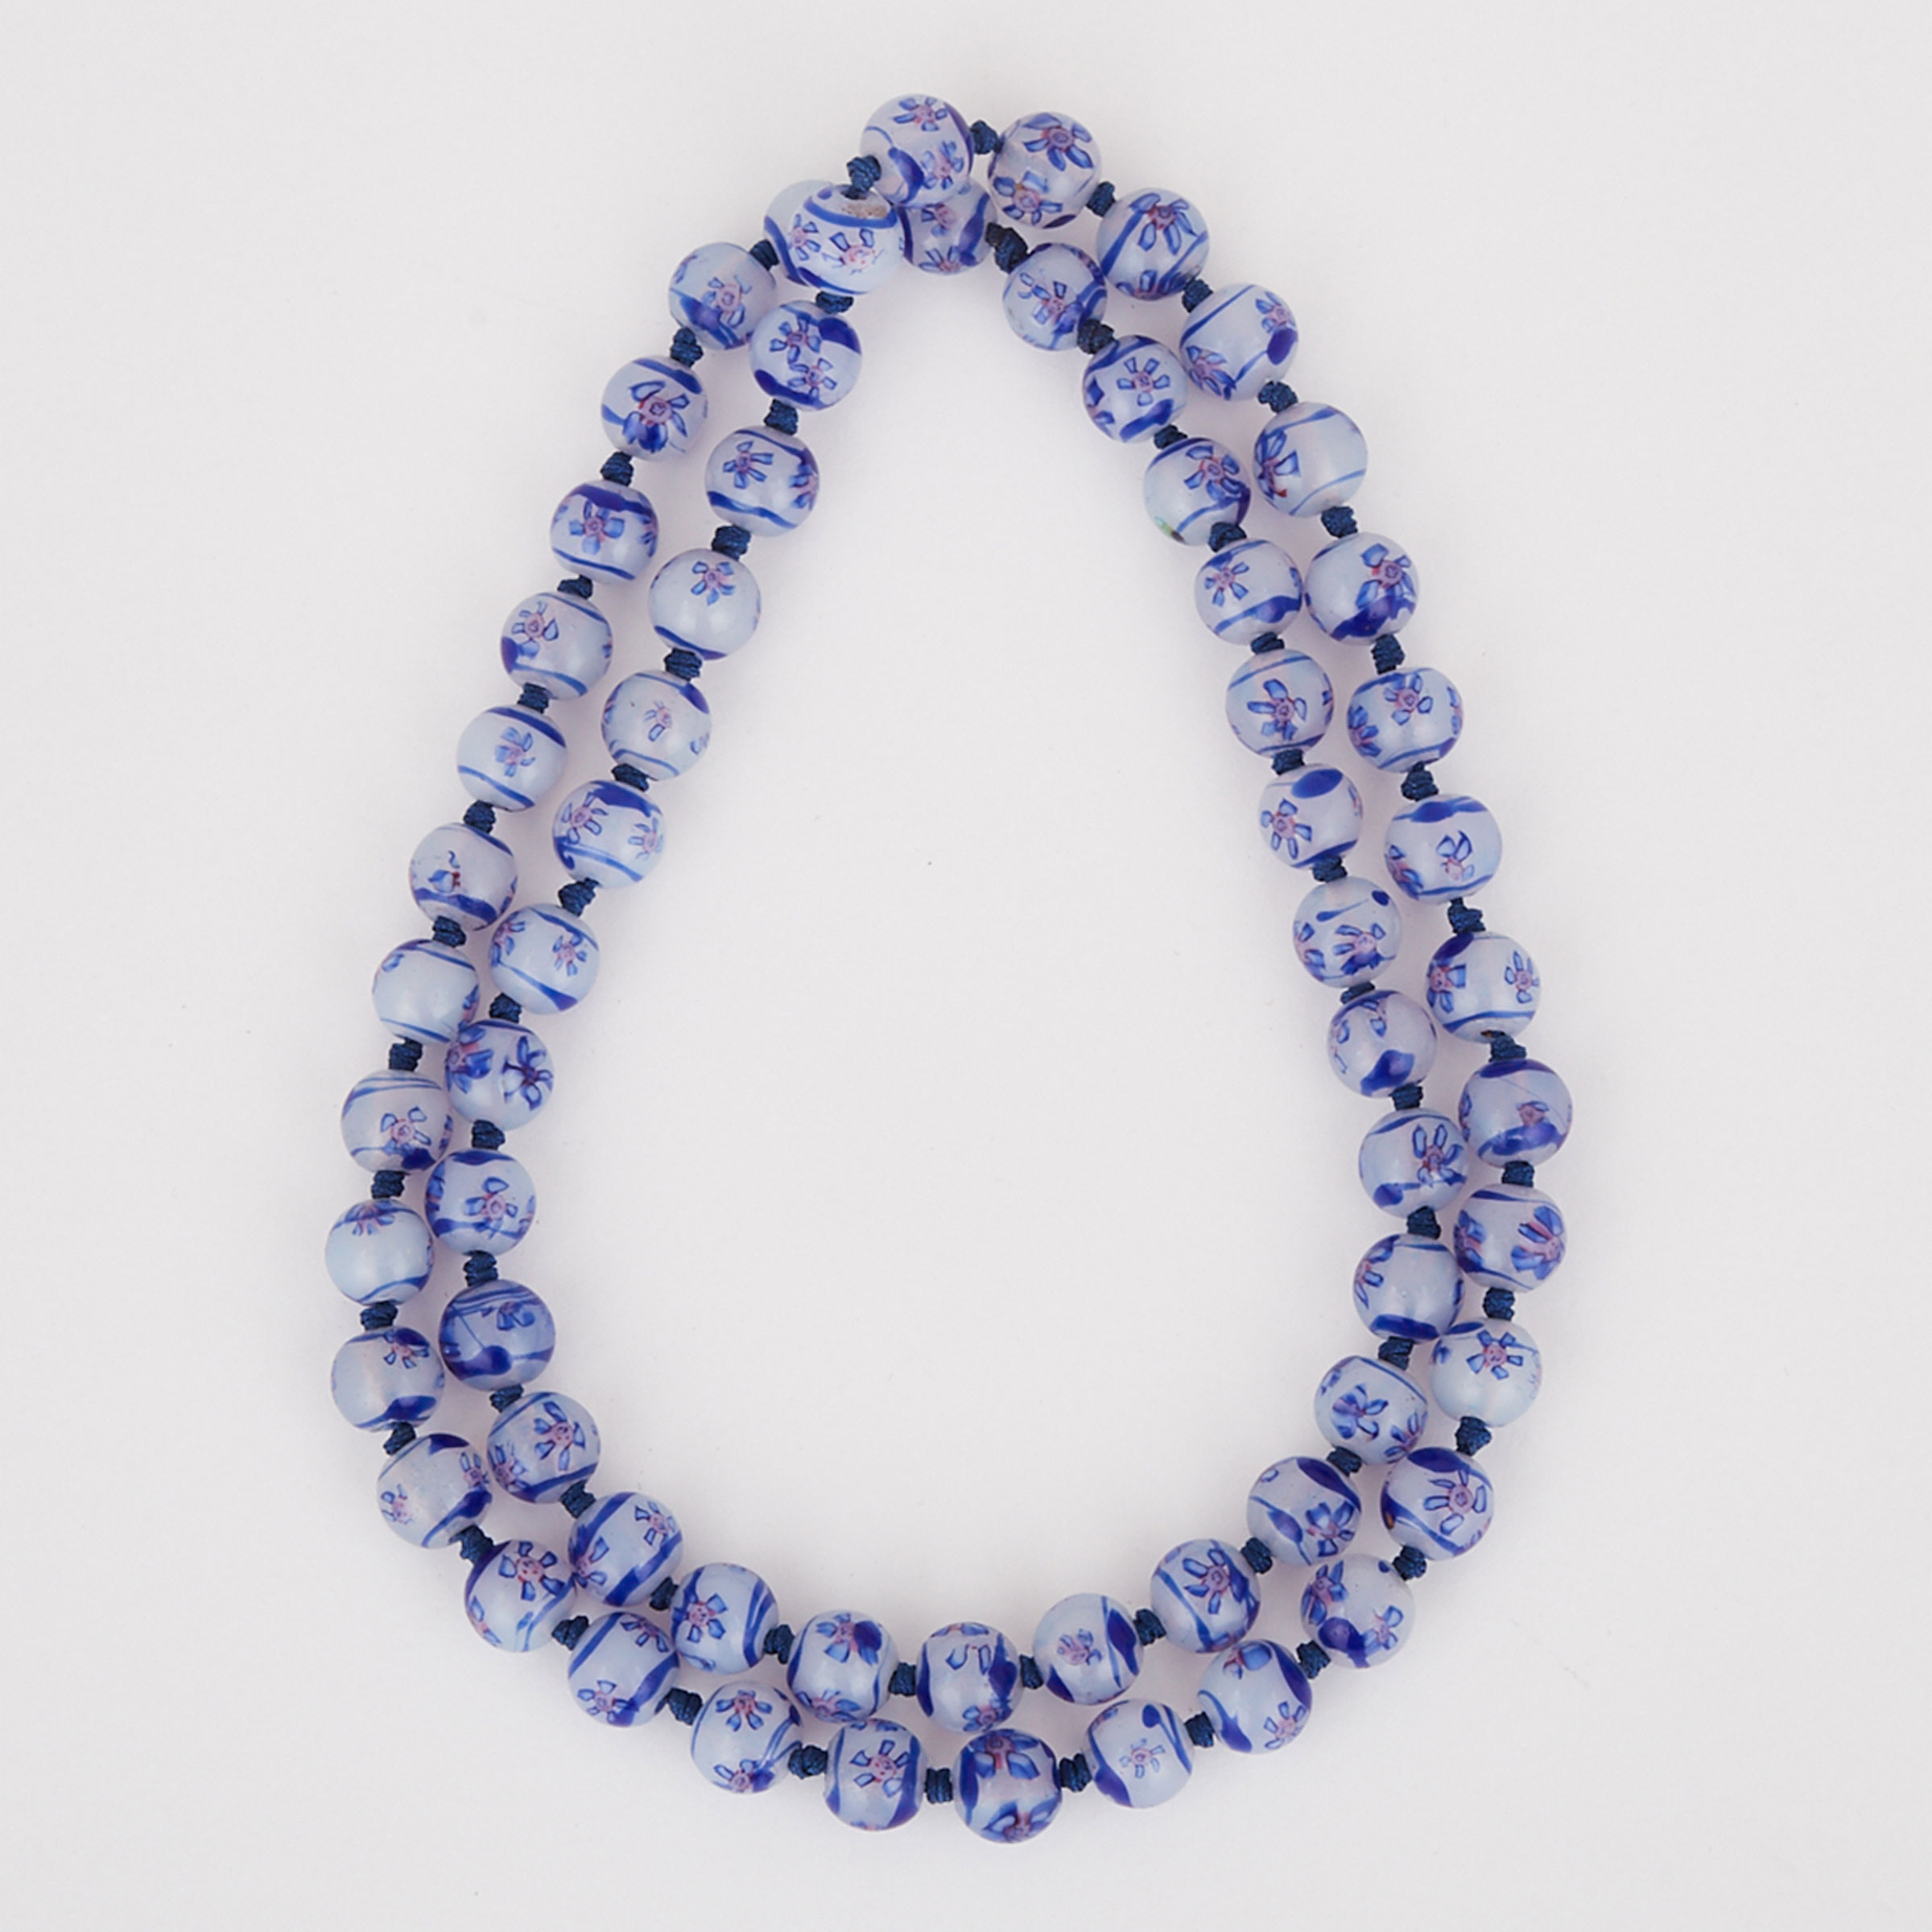 A Fragmentary Peking Glass Court Necklace, 19th Century